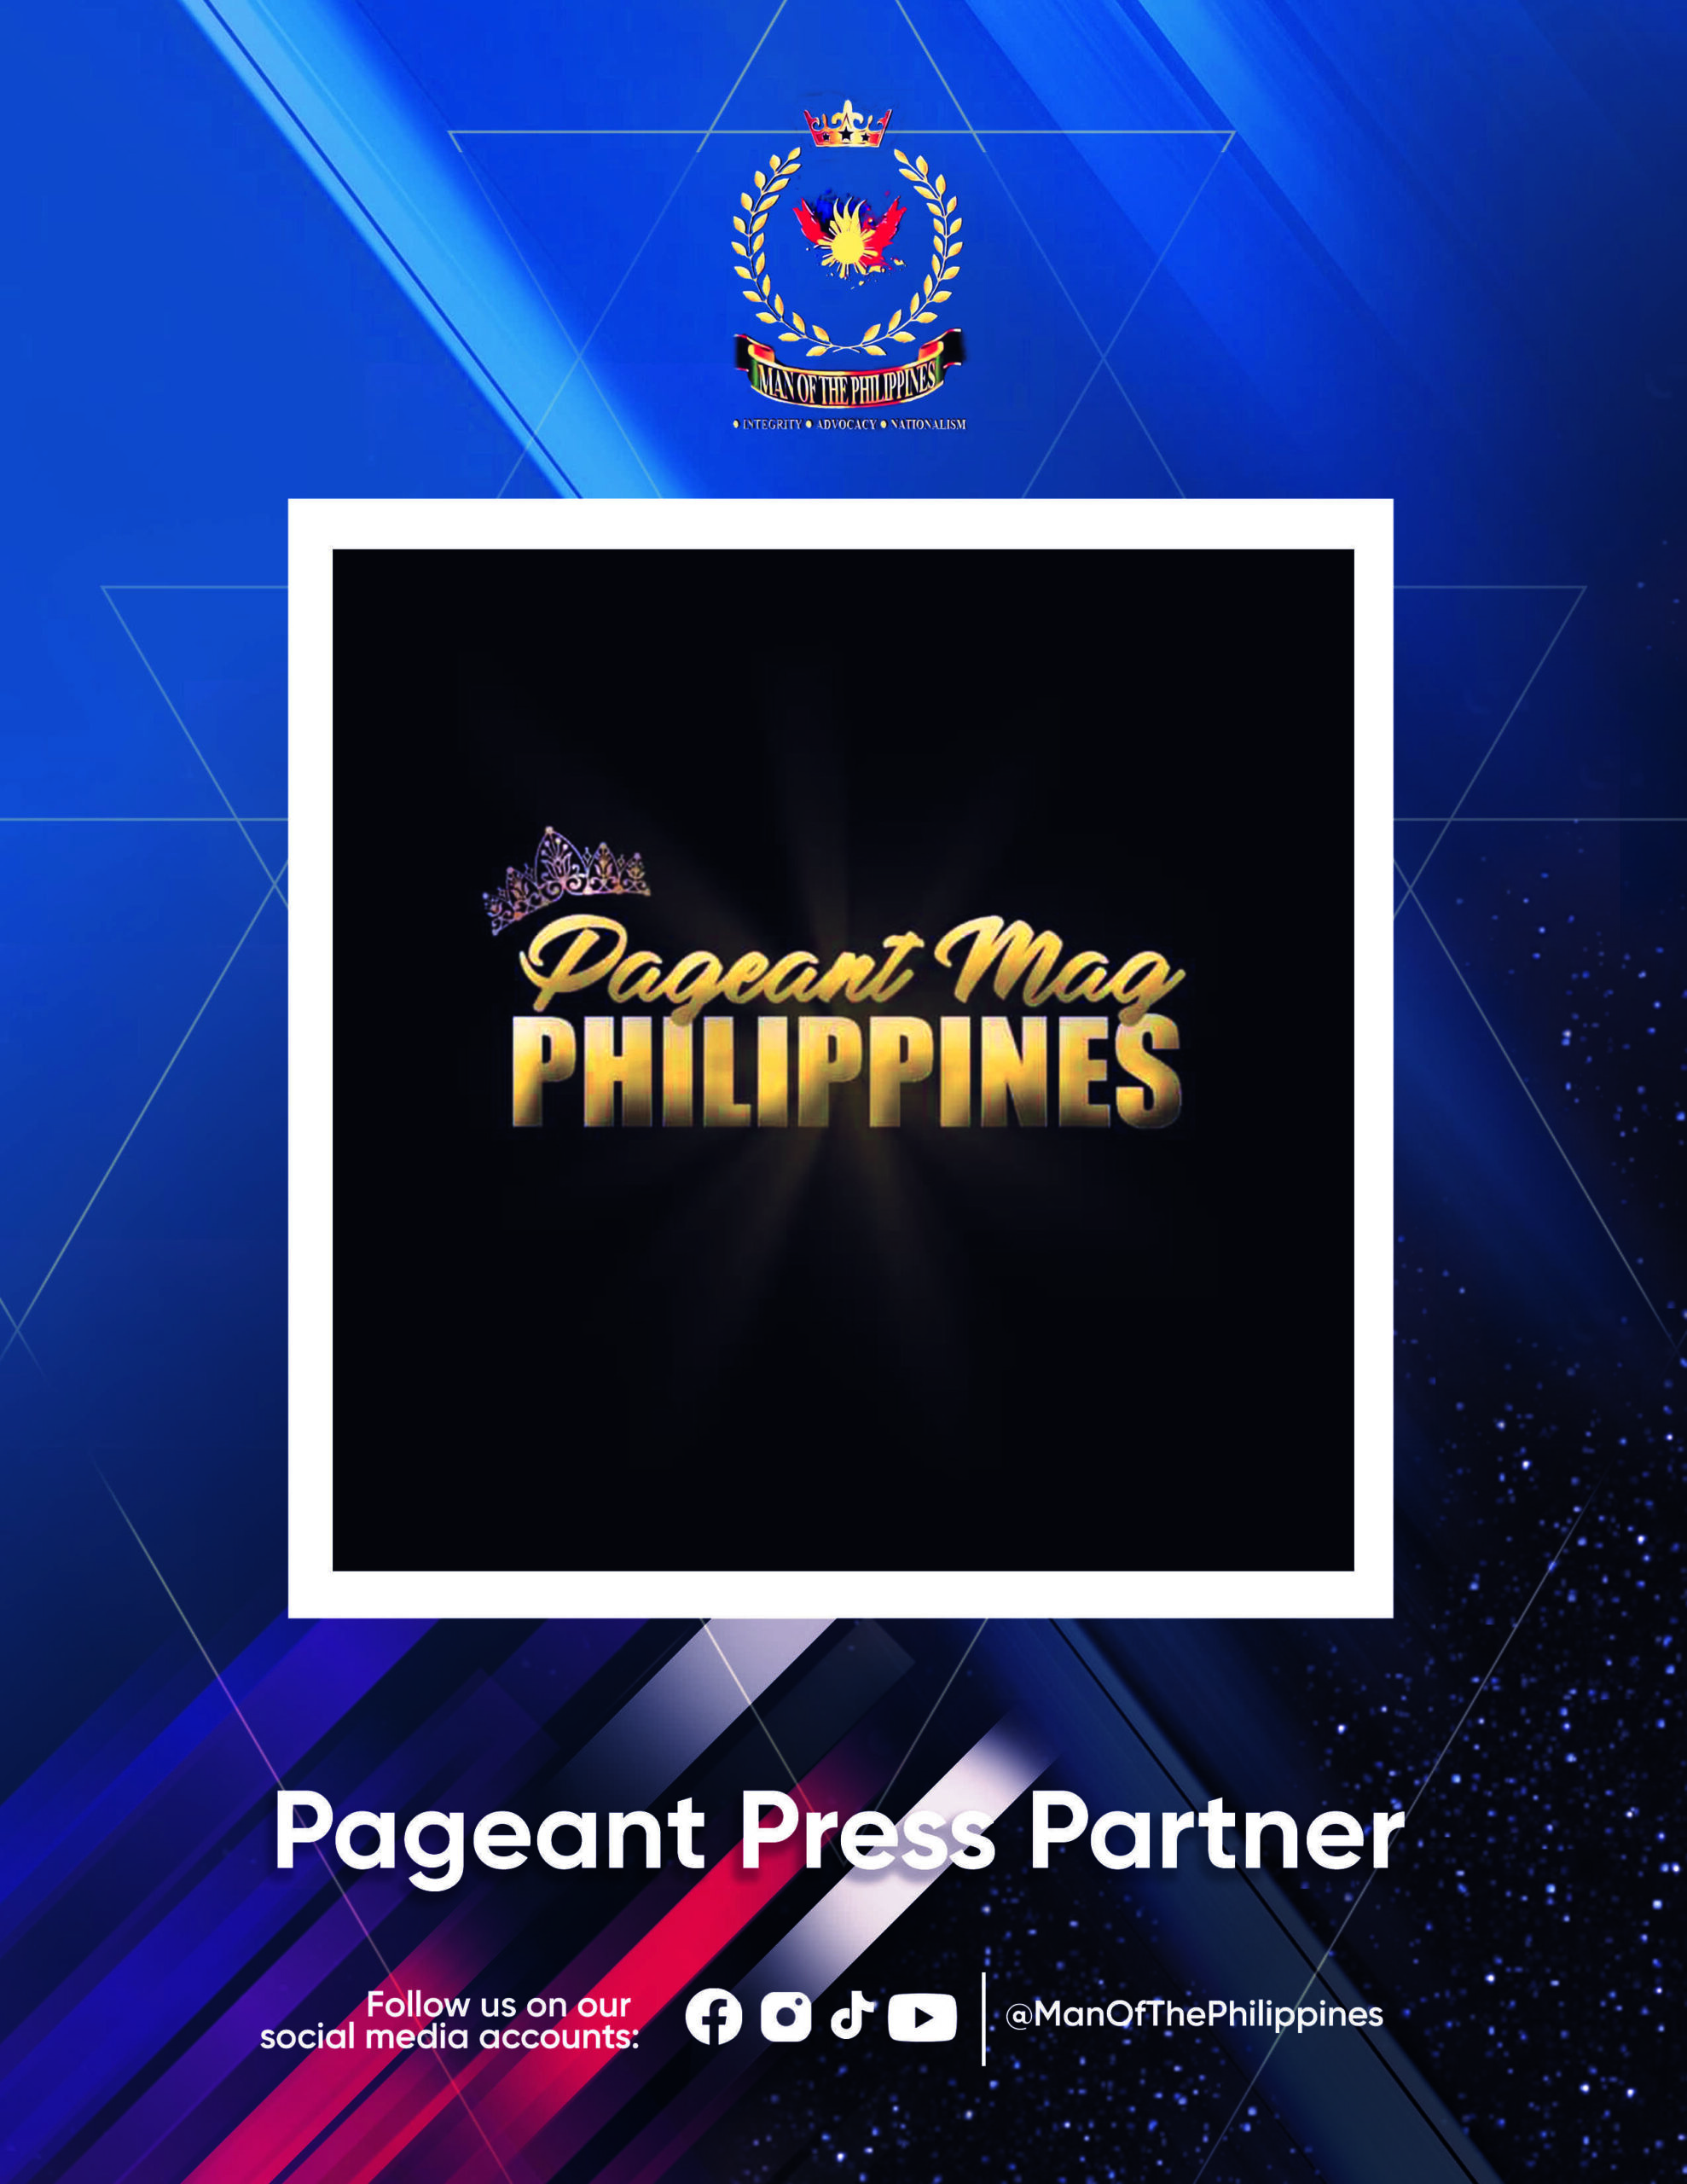 Pageant Mag Philippines